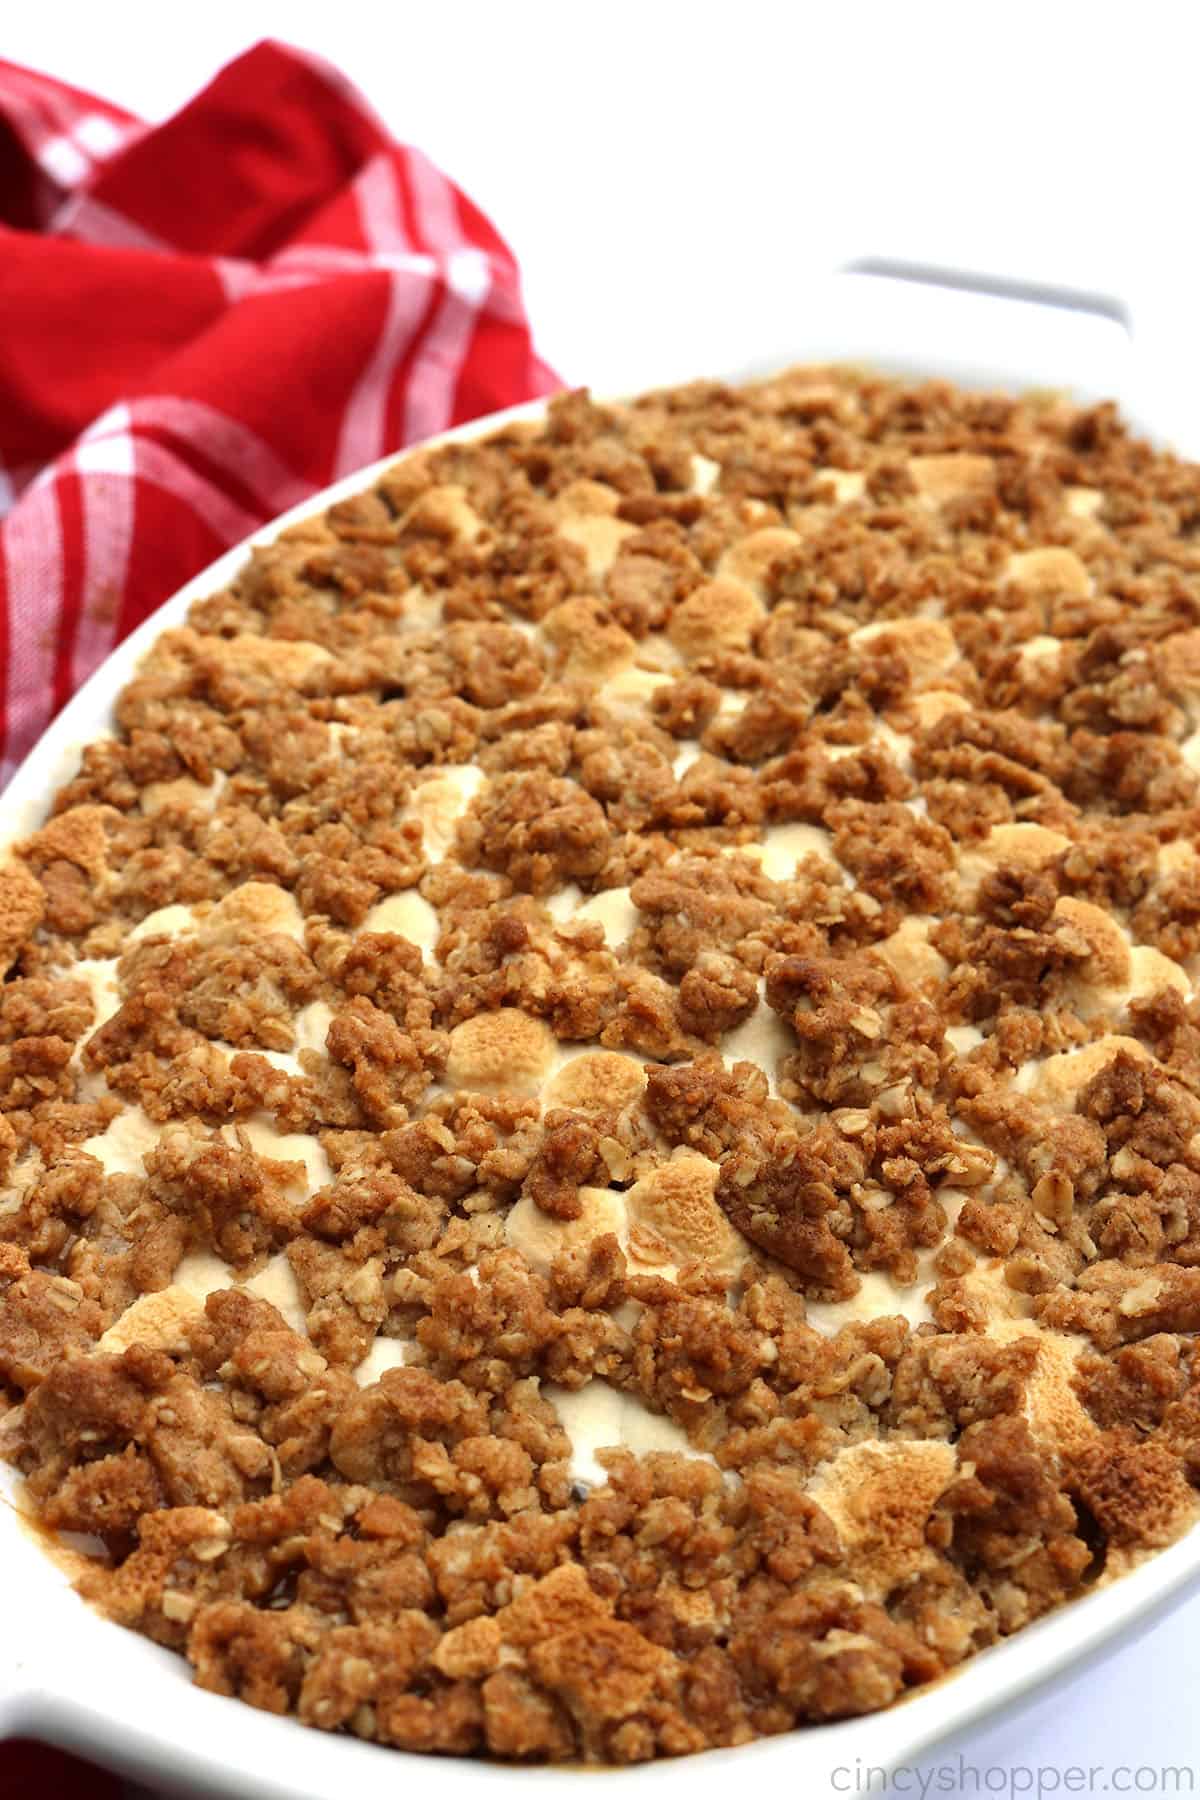 Sweet Potato Casserole with streusel and marshmallow topping in a white dish.